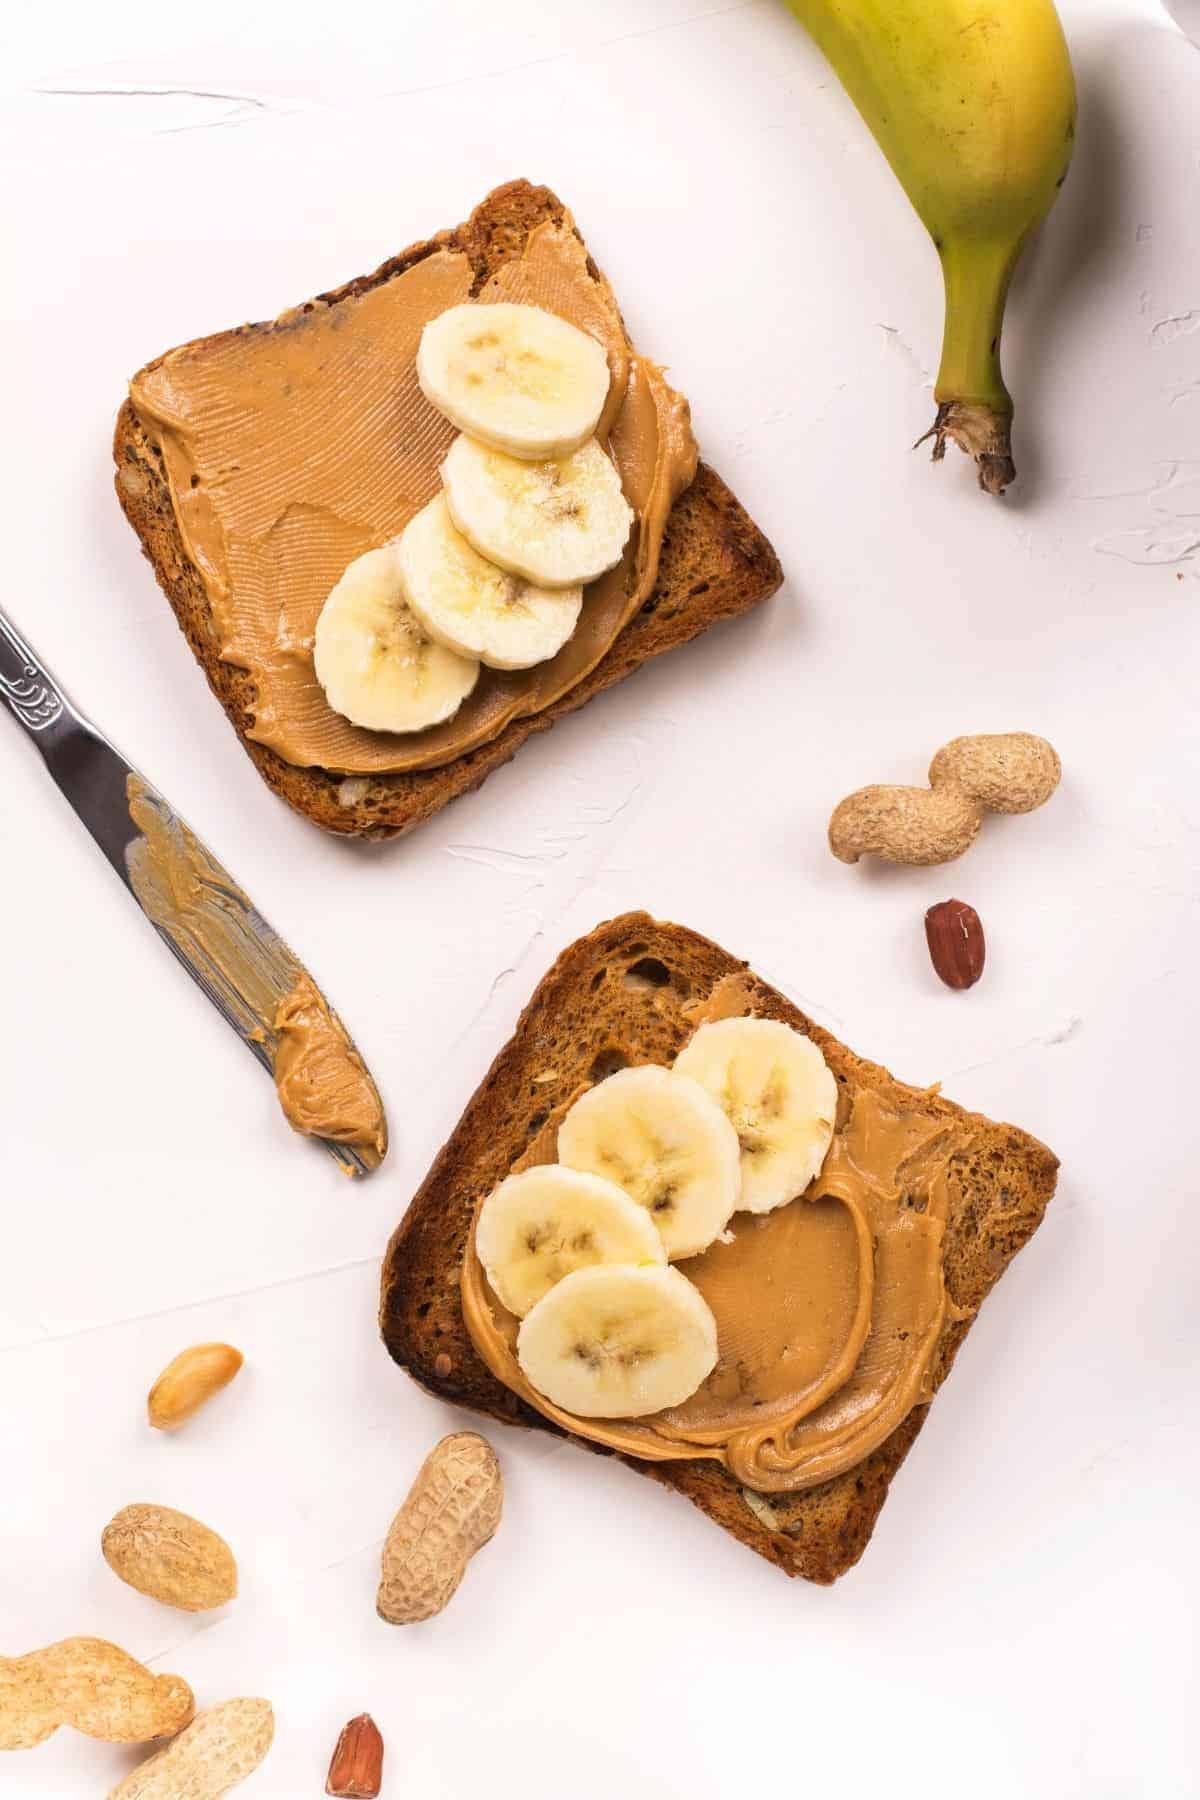 Peanut Butter on Toast with Banana Slices